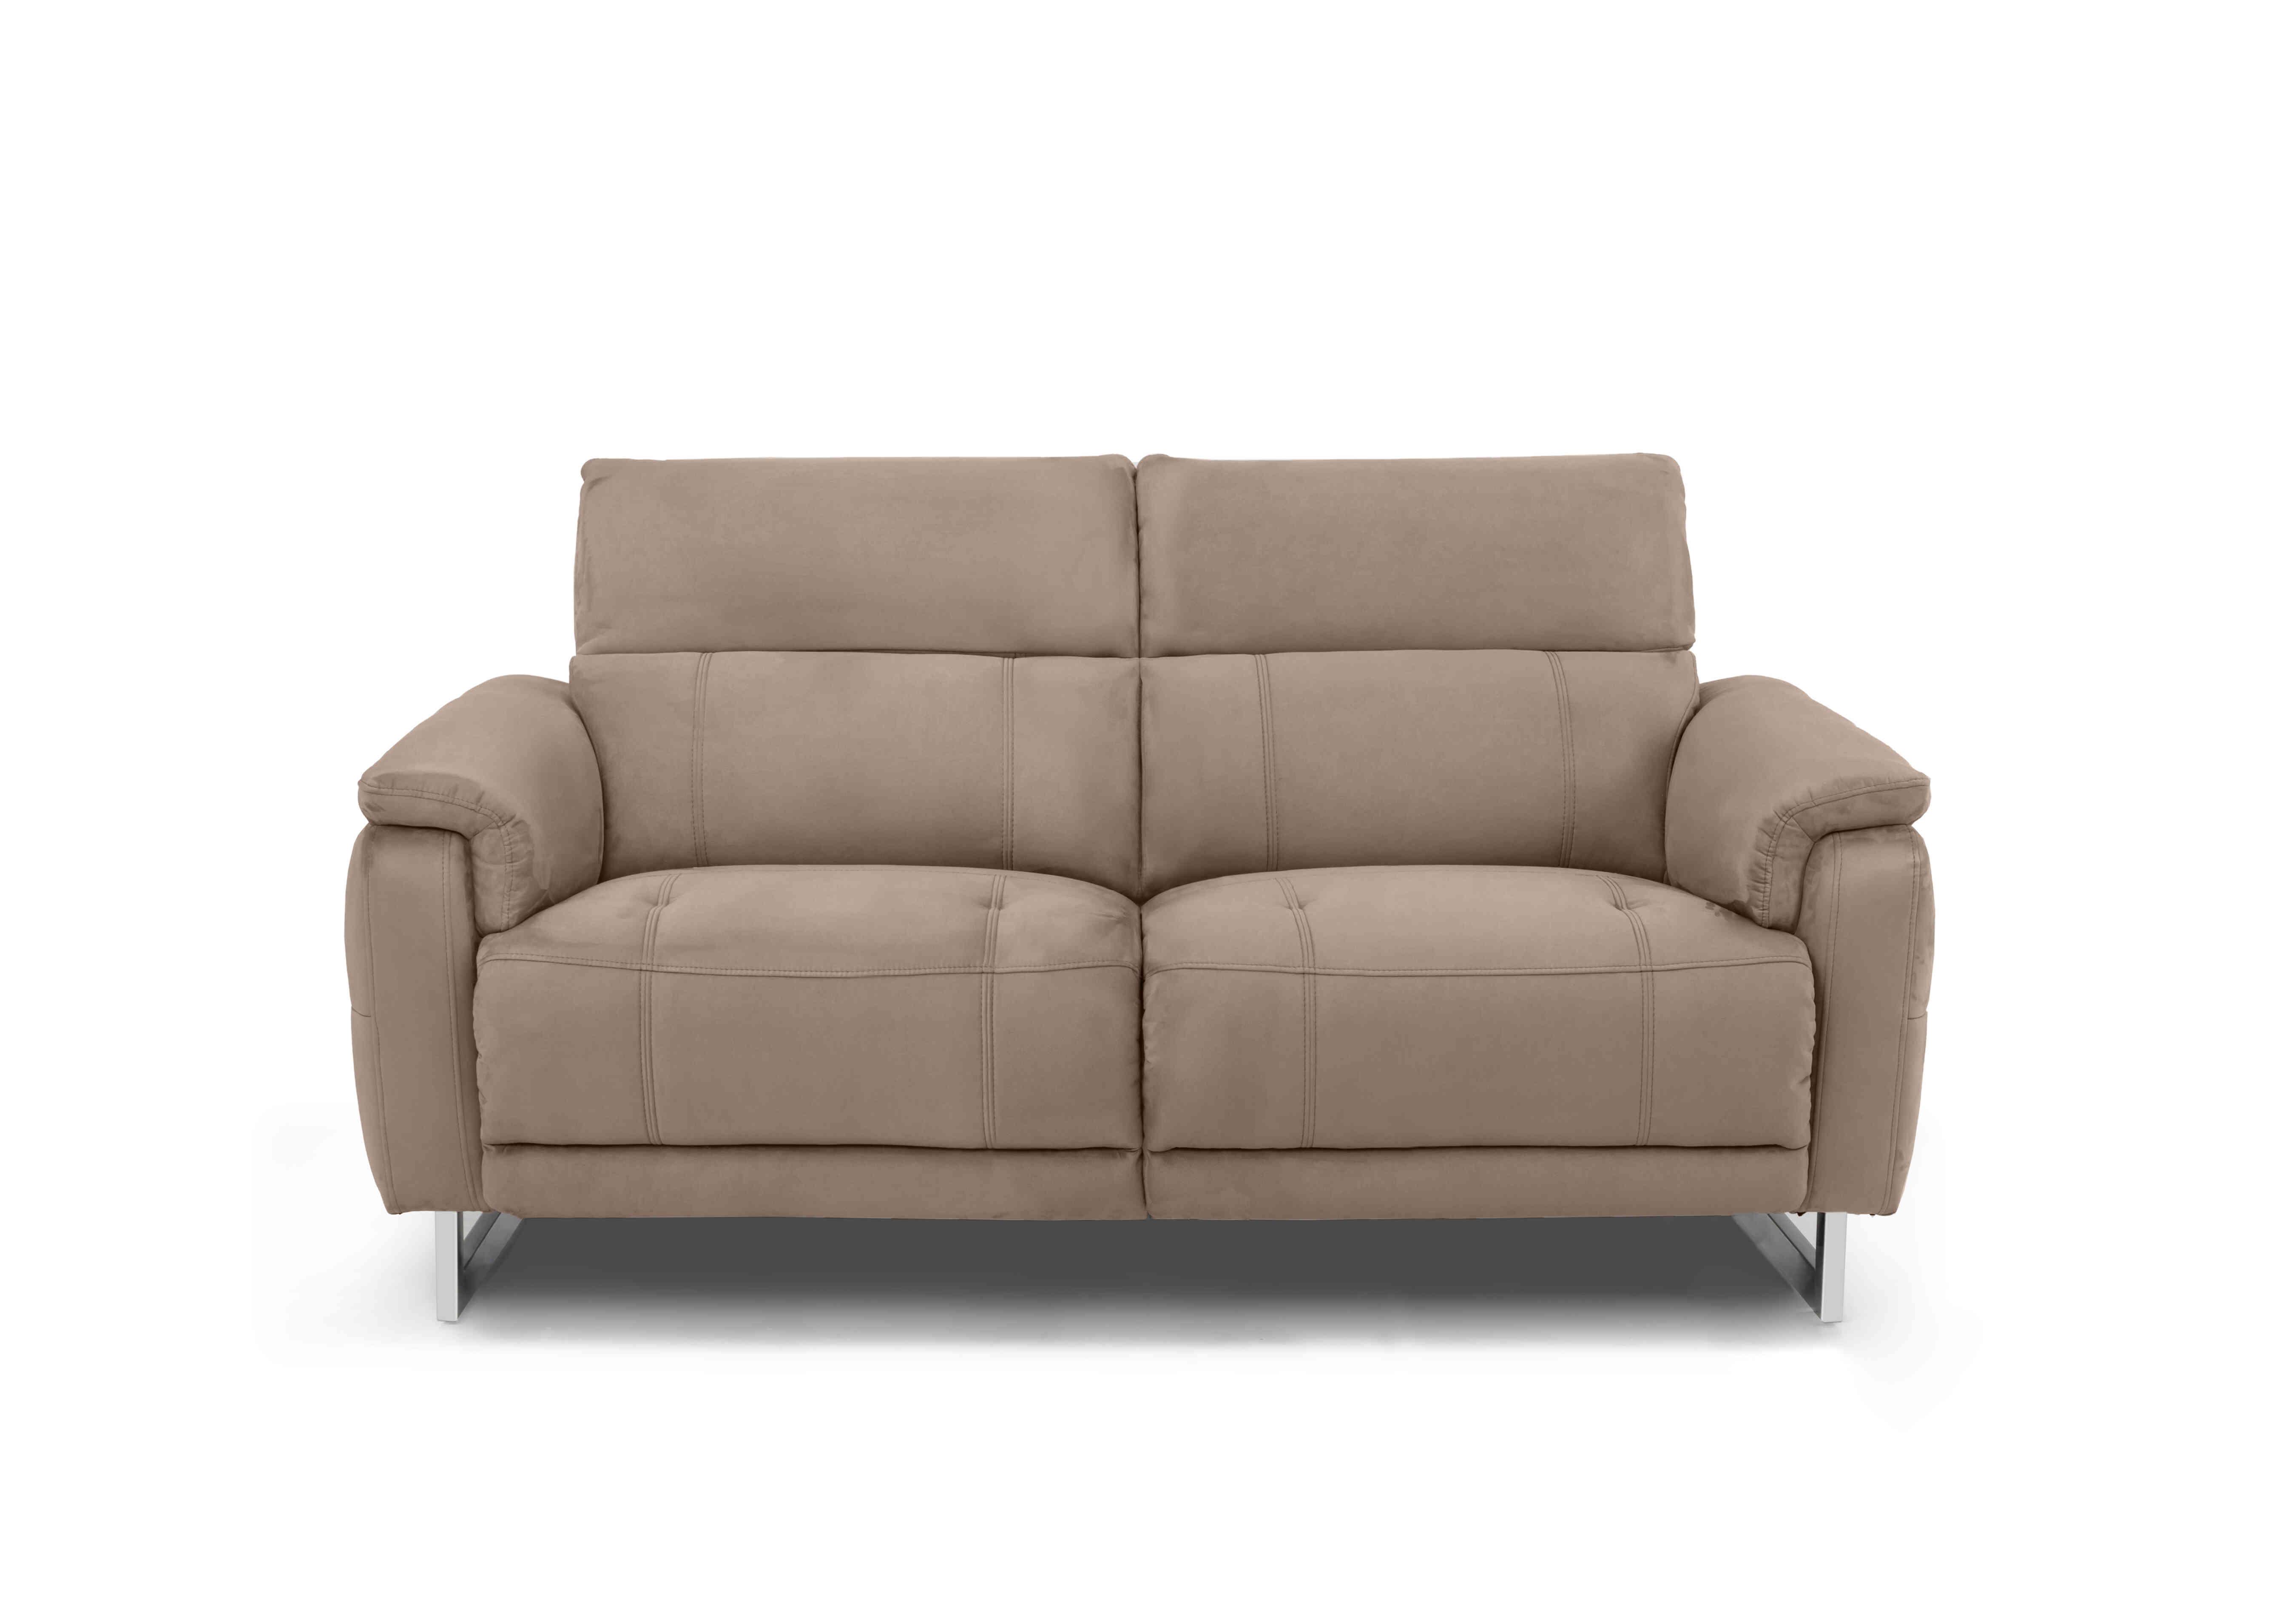 Moet 2 Seater Fabric Power Recliner Sofa with Telescopic Headrests in 51014 Opulence Cedar on Furniture Village